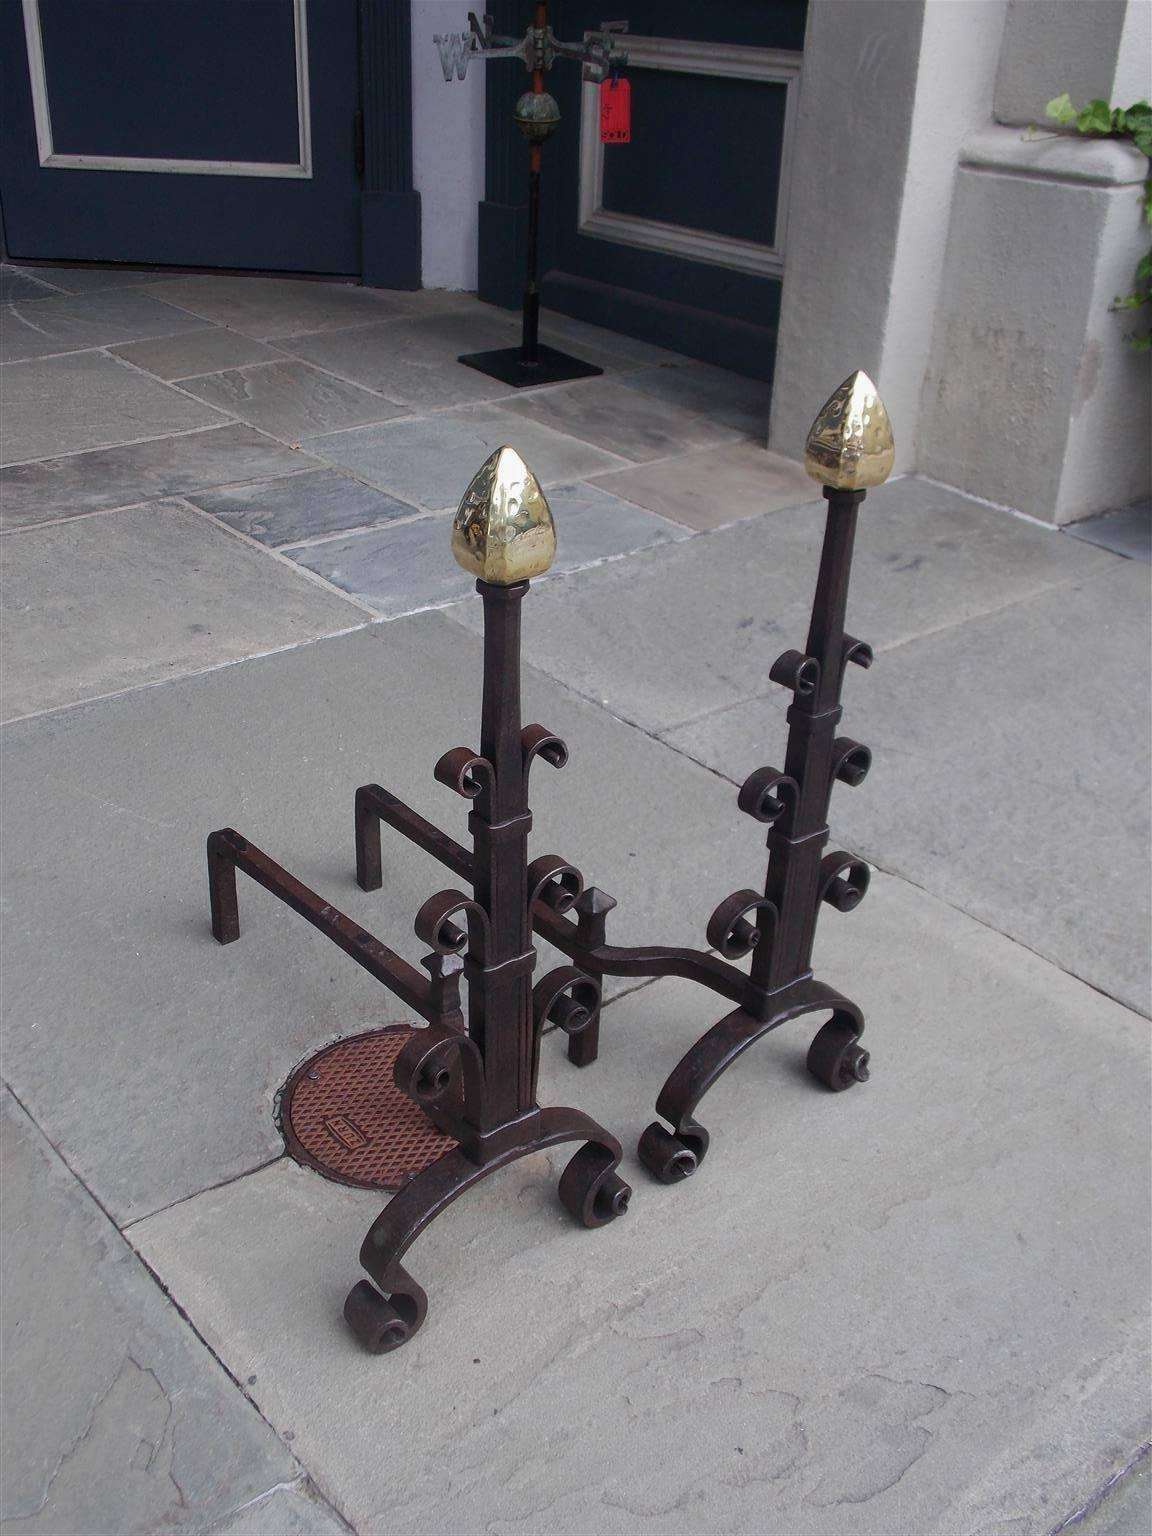 American wrought iron and brass andirons with faceted arrow finials, tapered squared plinths, artistic graduated scroll work, matching finial log stops, and terminating on decorative scrolled legs, Mid-19th century.